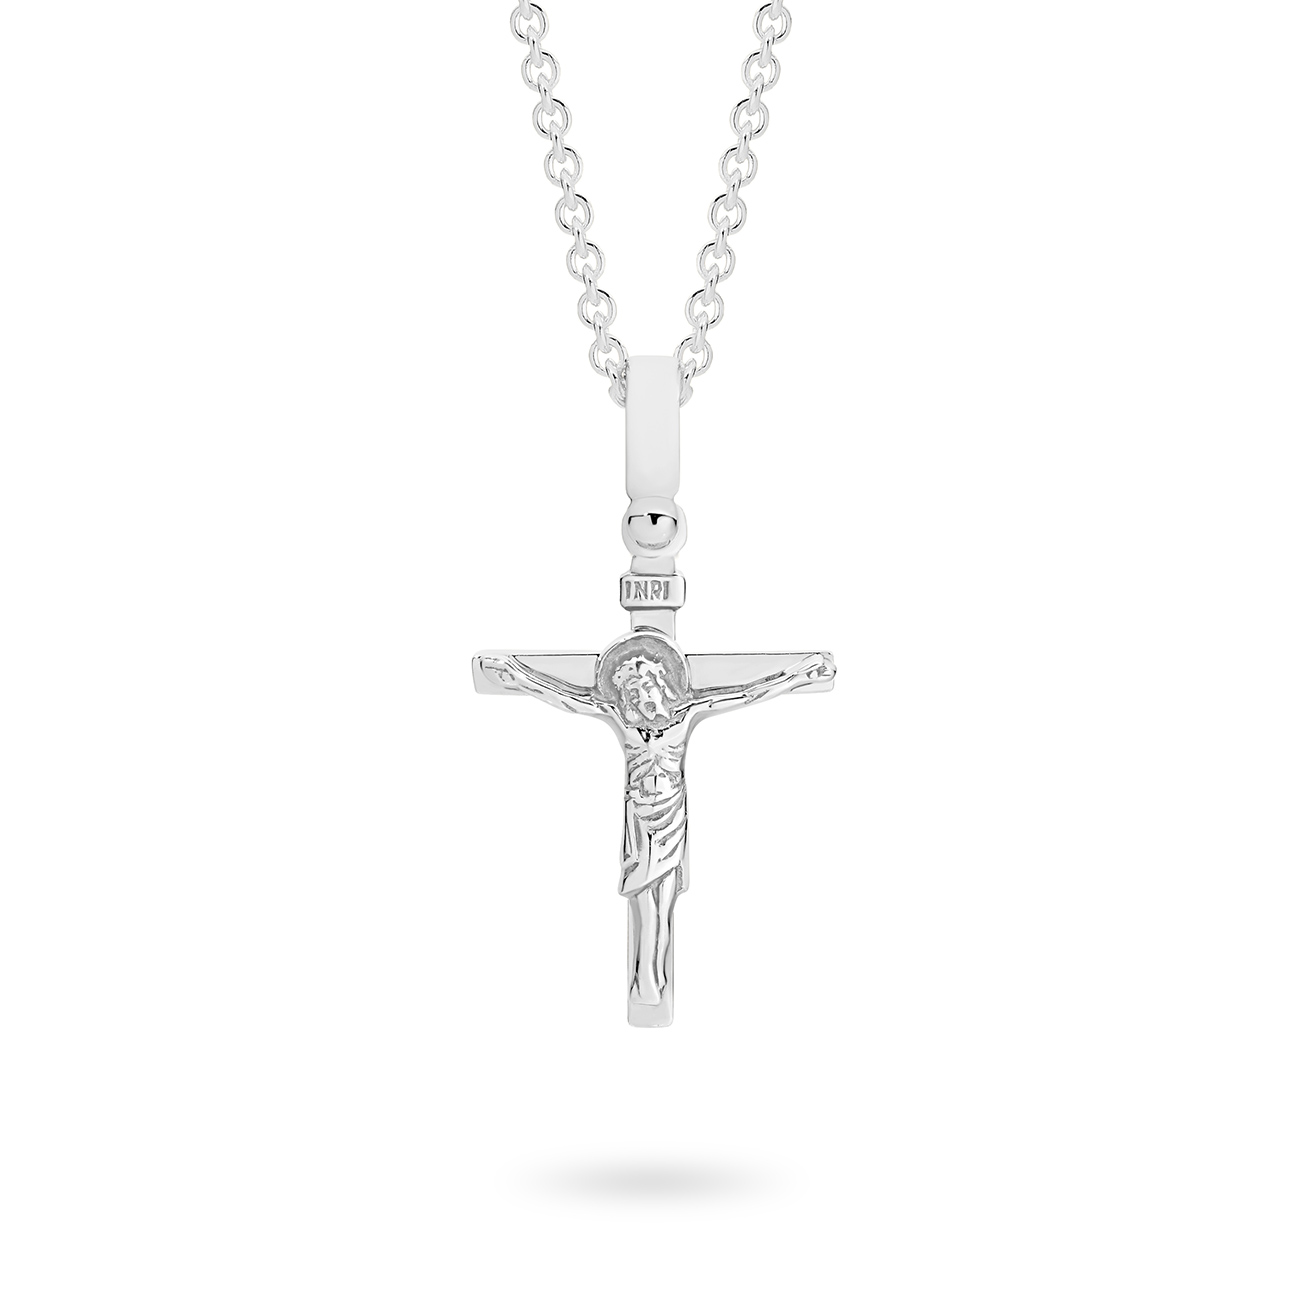 18K White Gold Polished Crucifix Pendant With INRI Plate